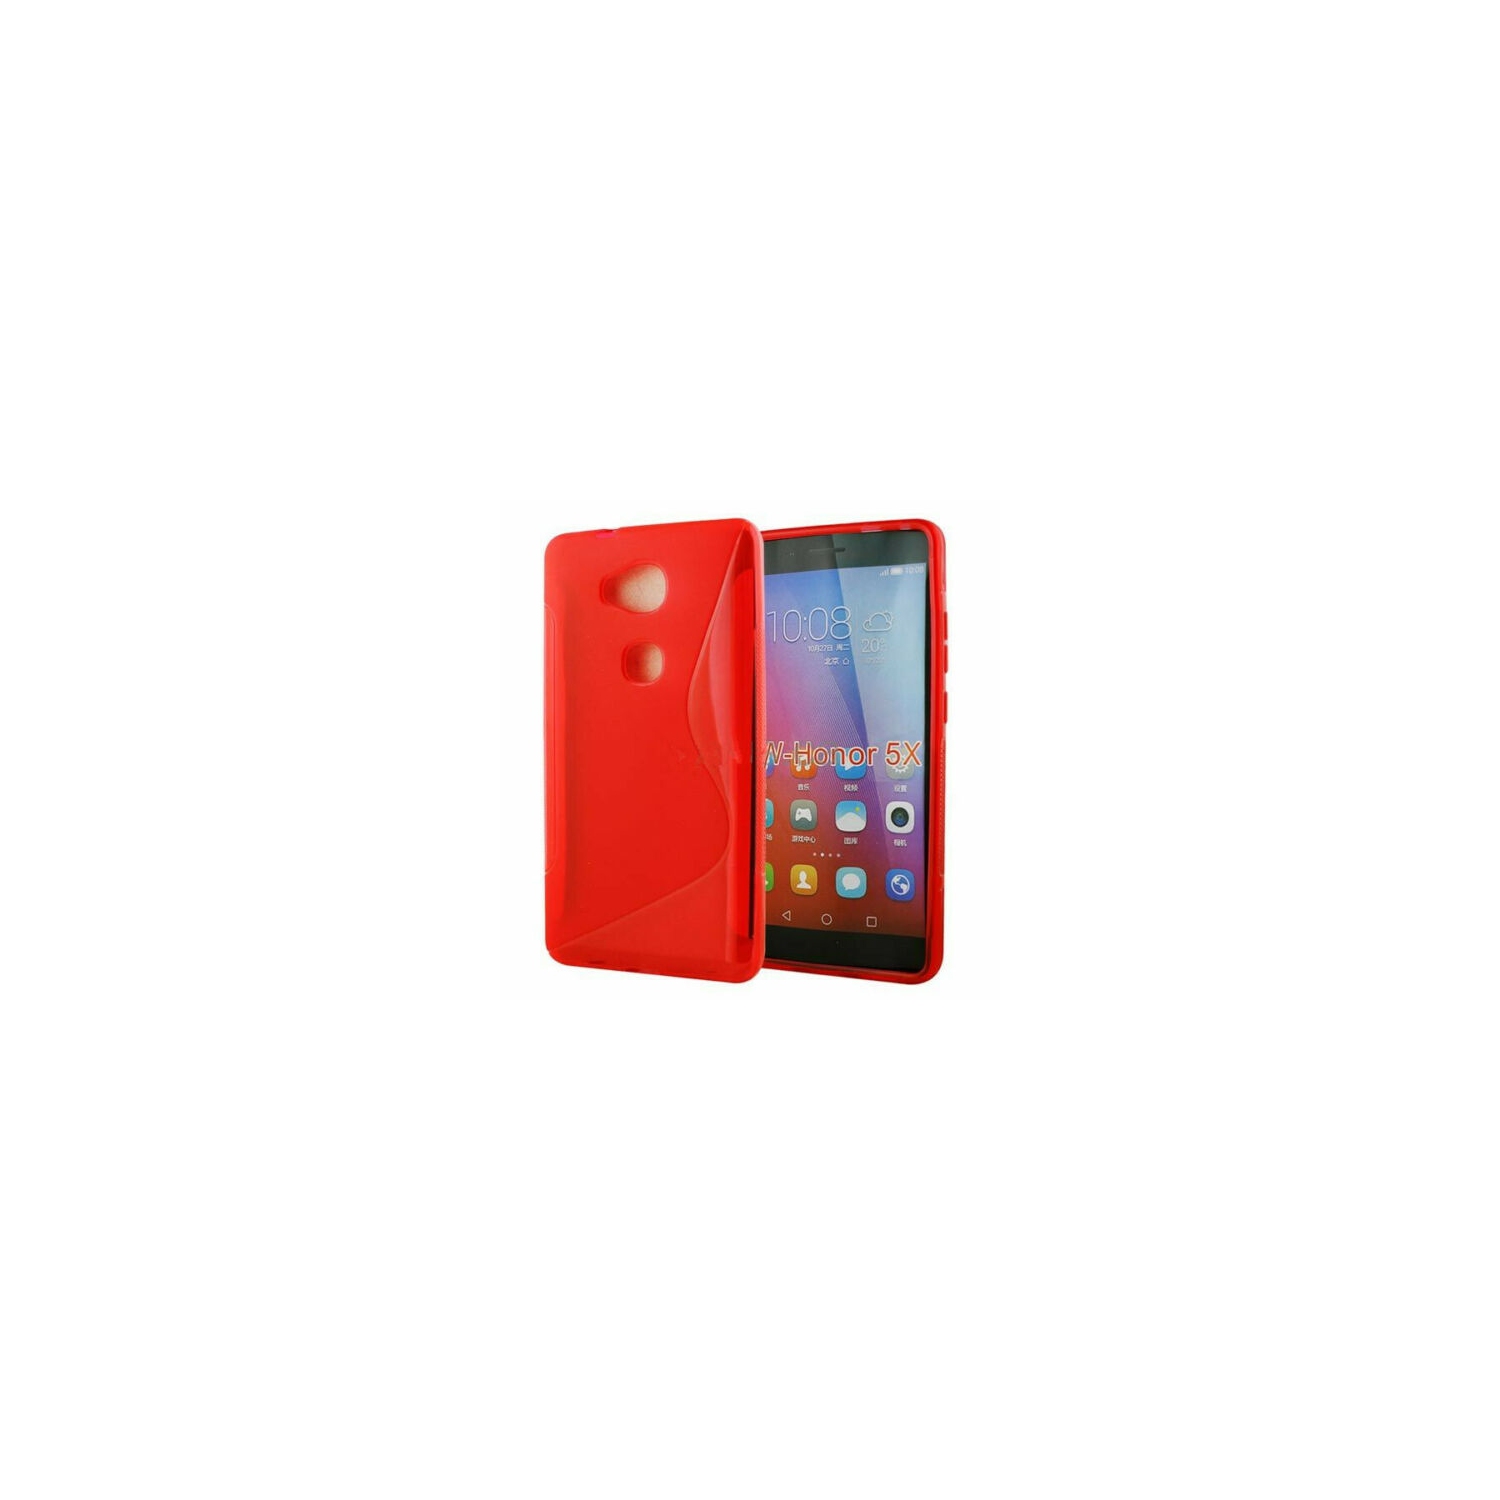 【CSmart】 Ultra Thin Soft TPU Silicone Jelly Bumper Back Cover Case for Huawei GR5 / Honor 5x, Red